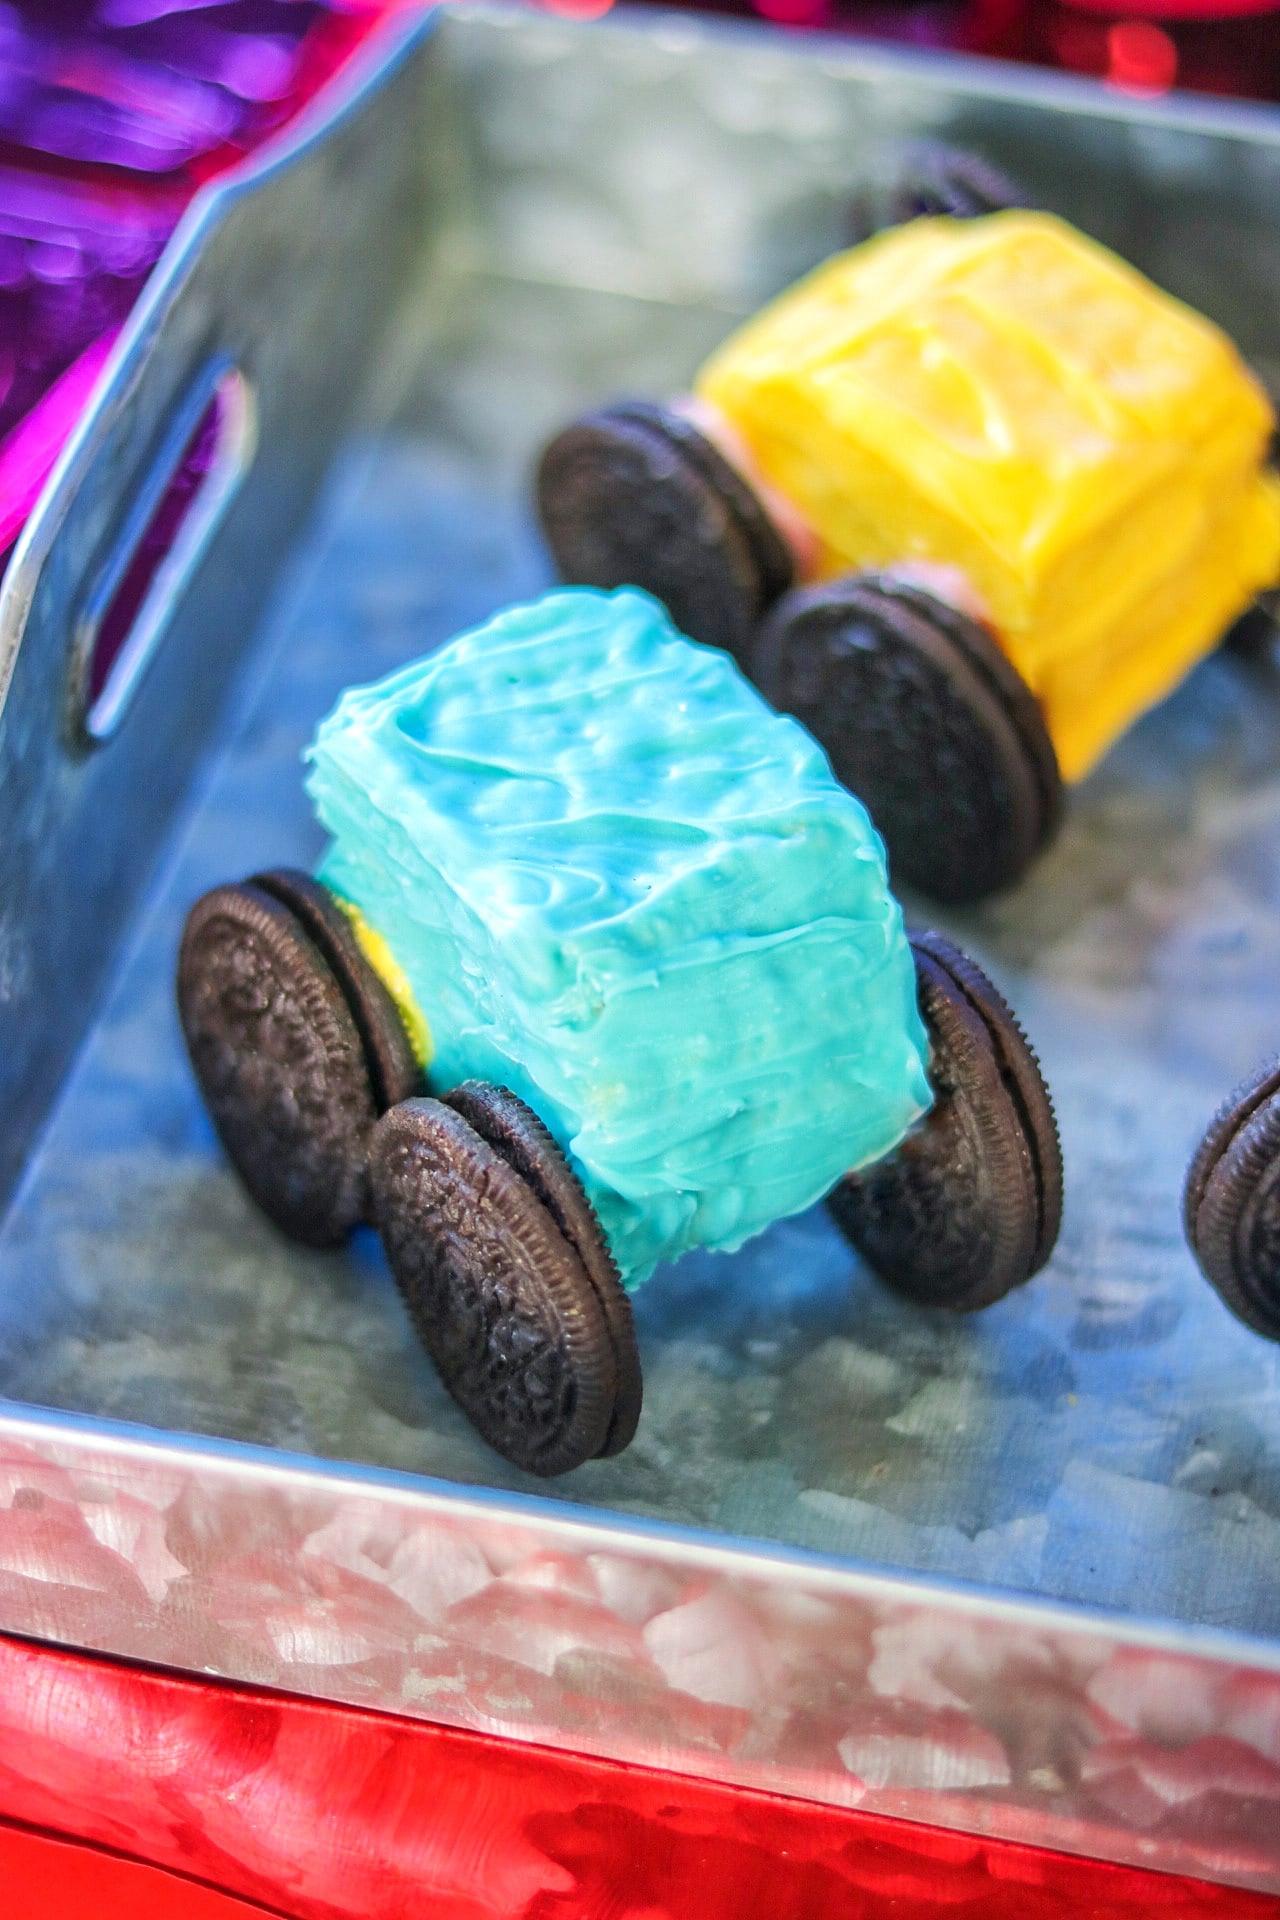 Transformers themed food: Mirage and Bumblebee Rice Krispies Treats